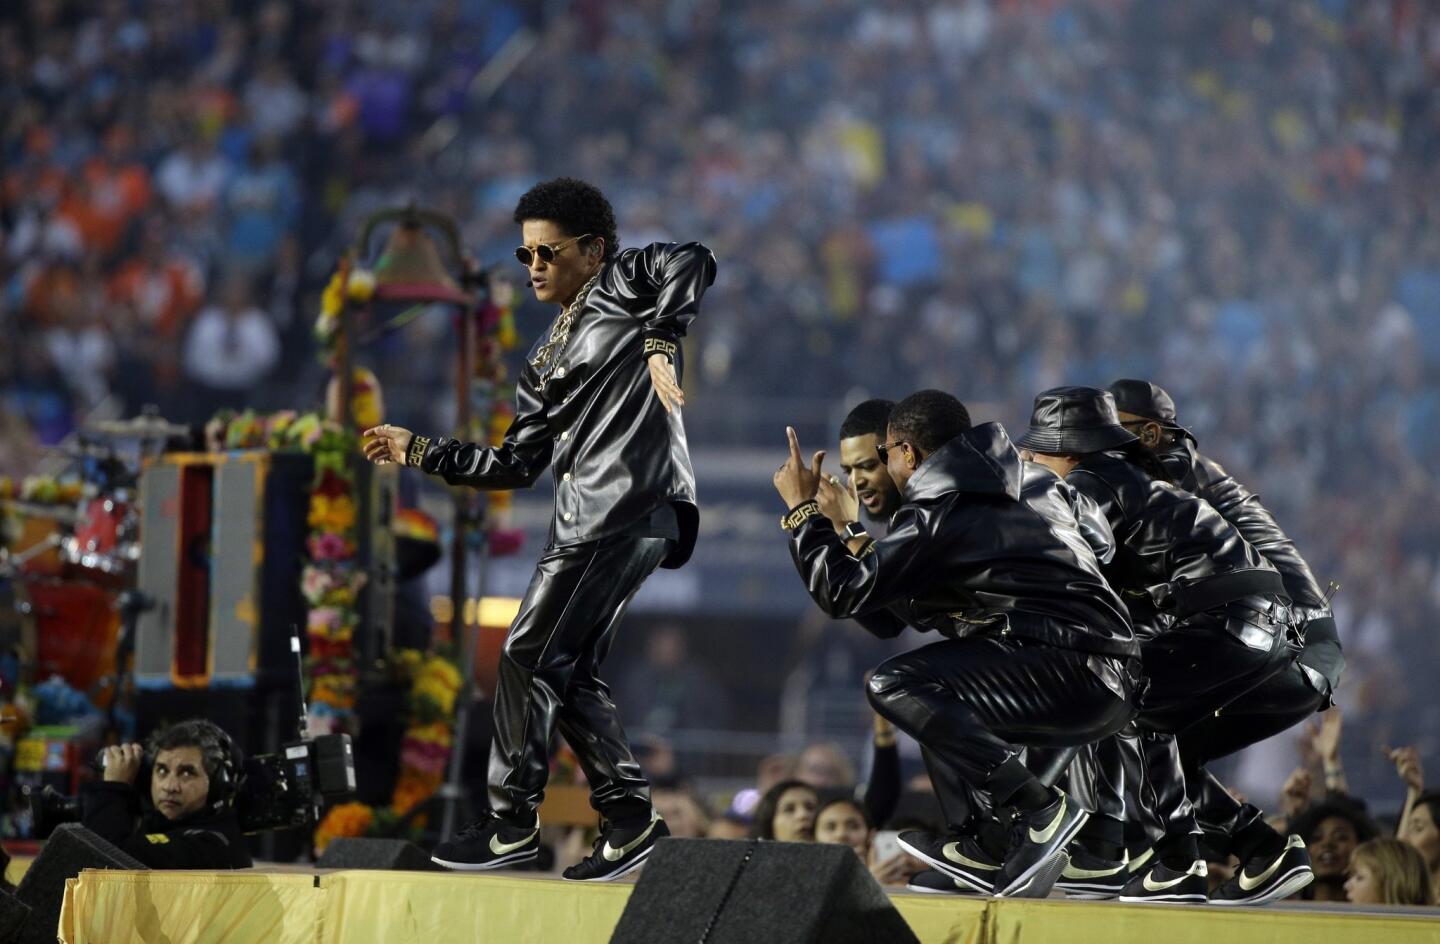 Bruno Mars, far left, performs during halftime of the NFL Super Bowl 50 football game Sunday, Feb. 7, 2016, in Santa Clara, Calif. (AP Photo/Julie Jacobson)